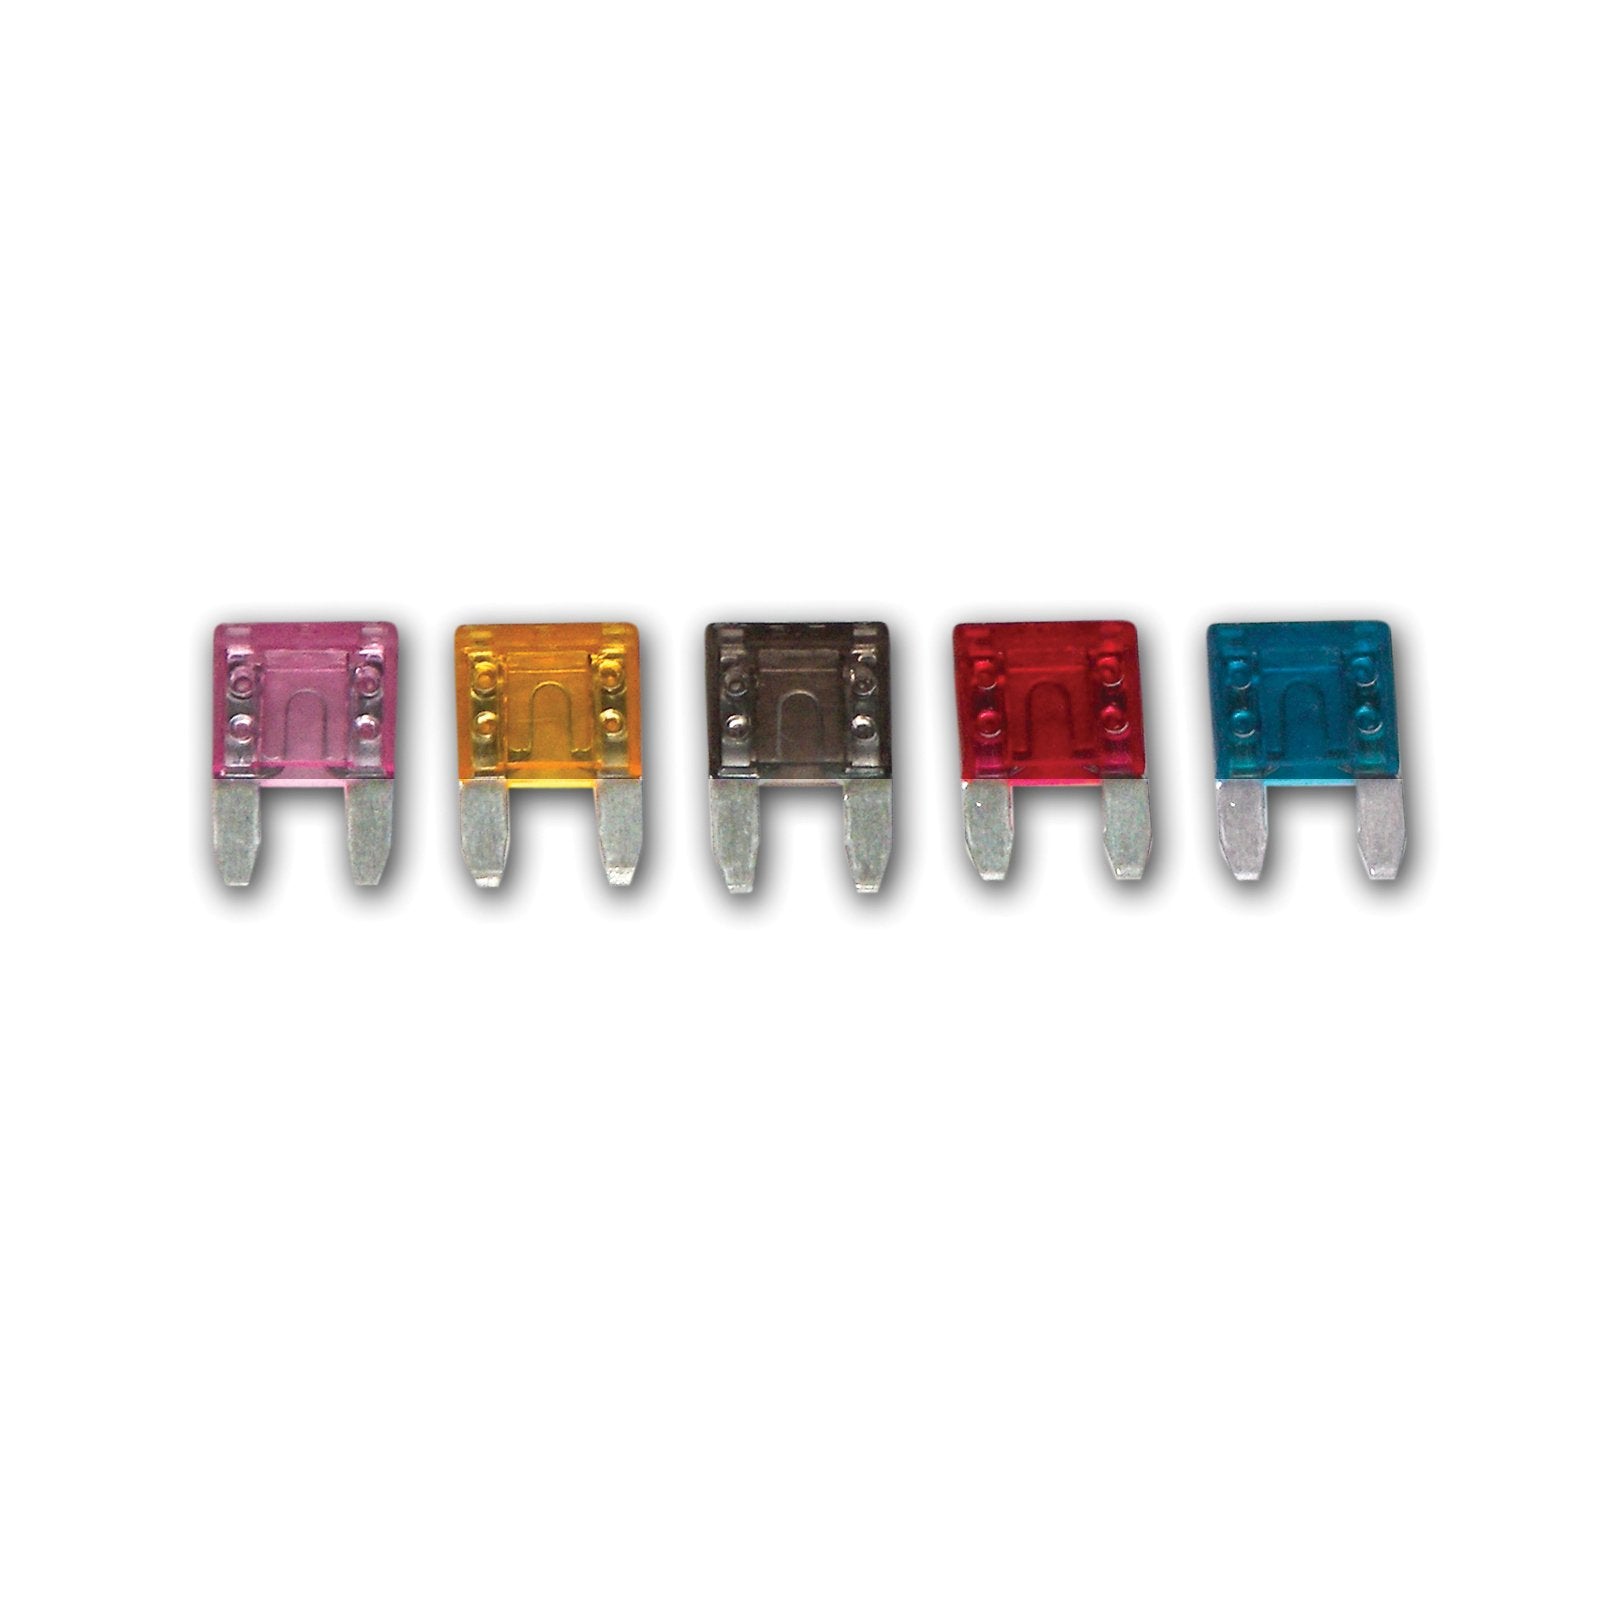 WirthCo 24100 Battery Doctor ATM LED Mini-Fuse, (Pack of 5)